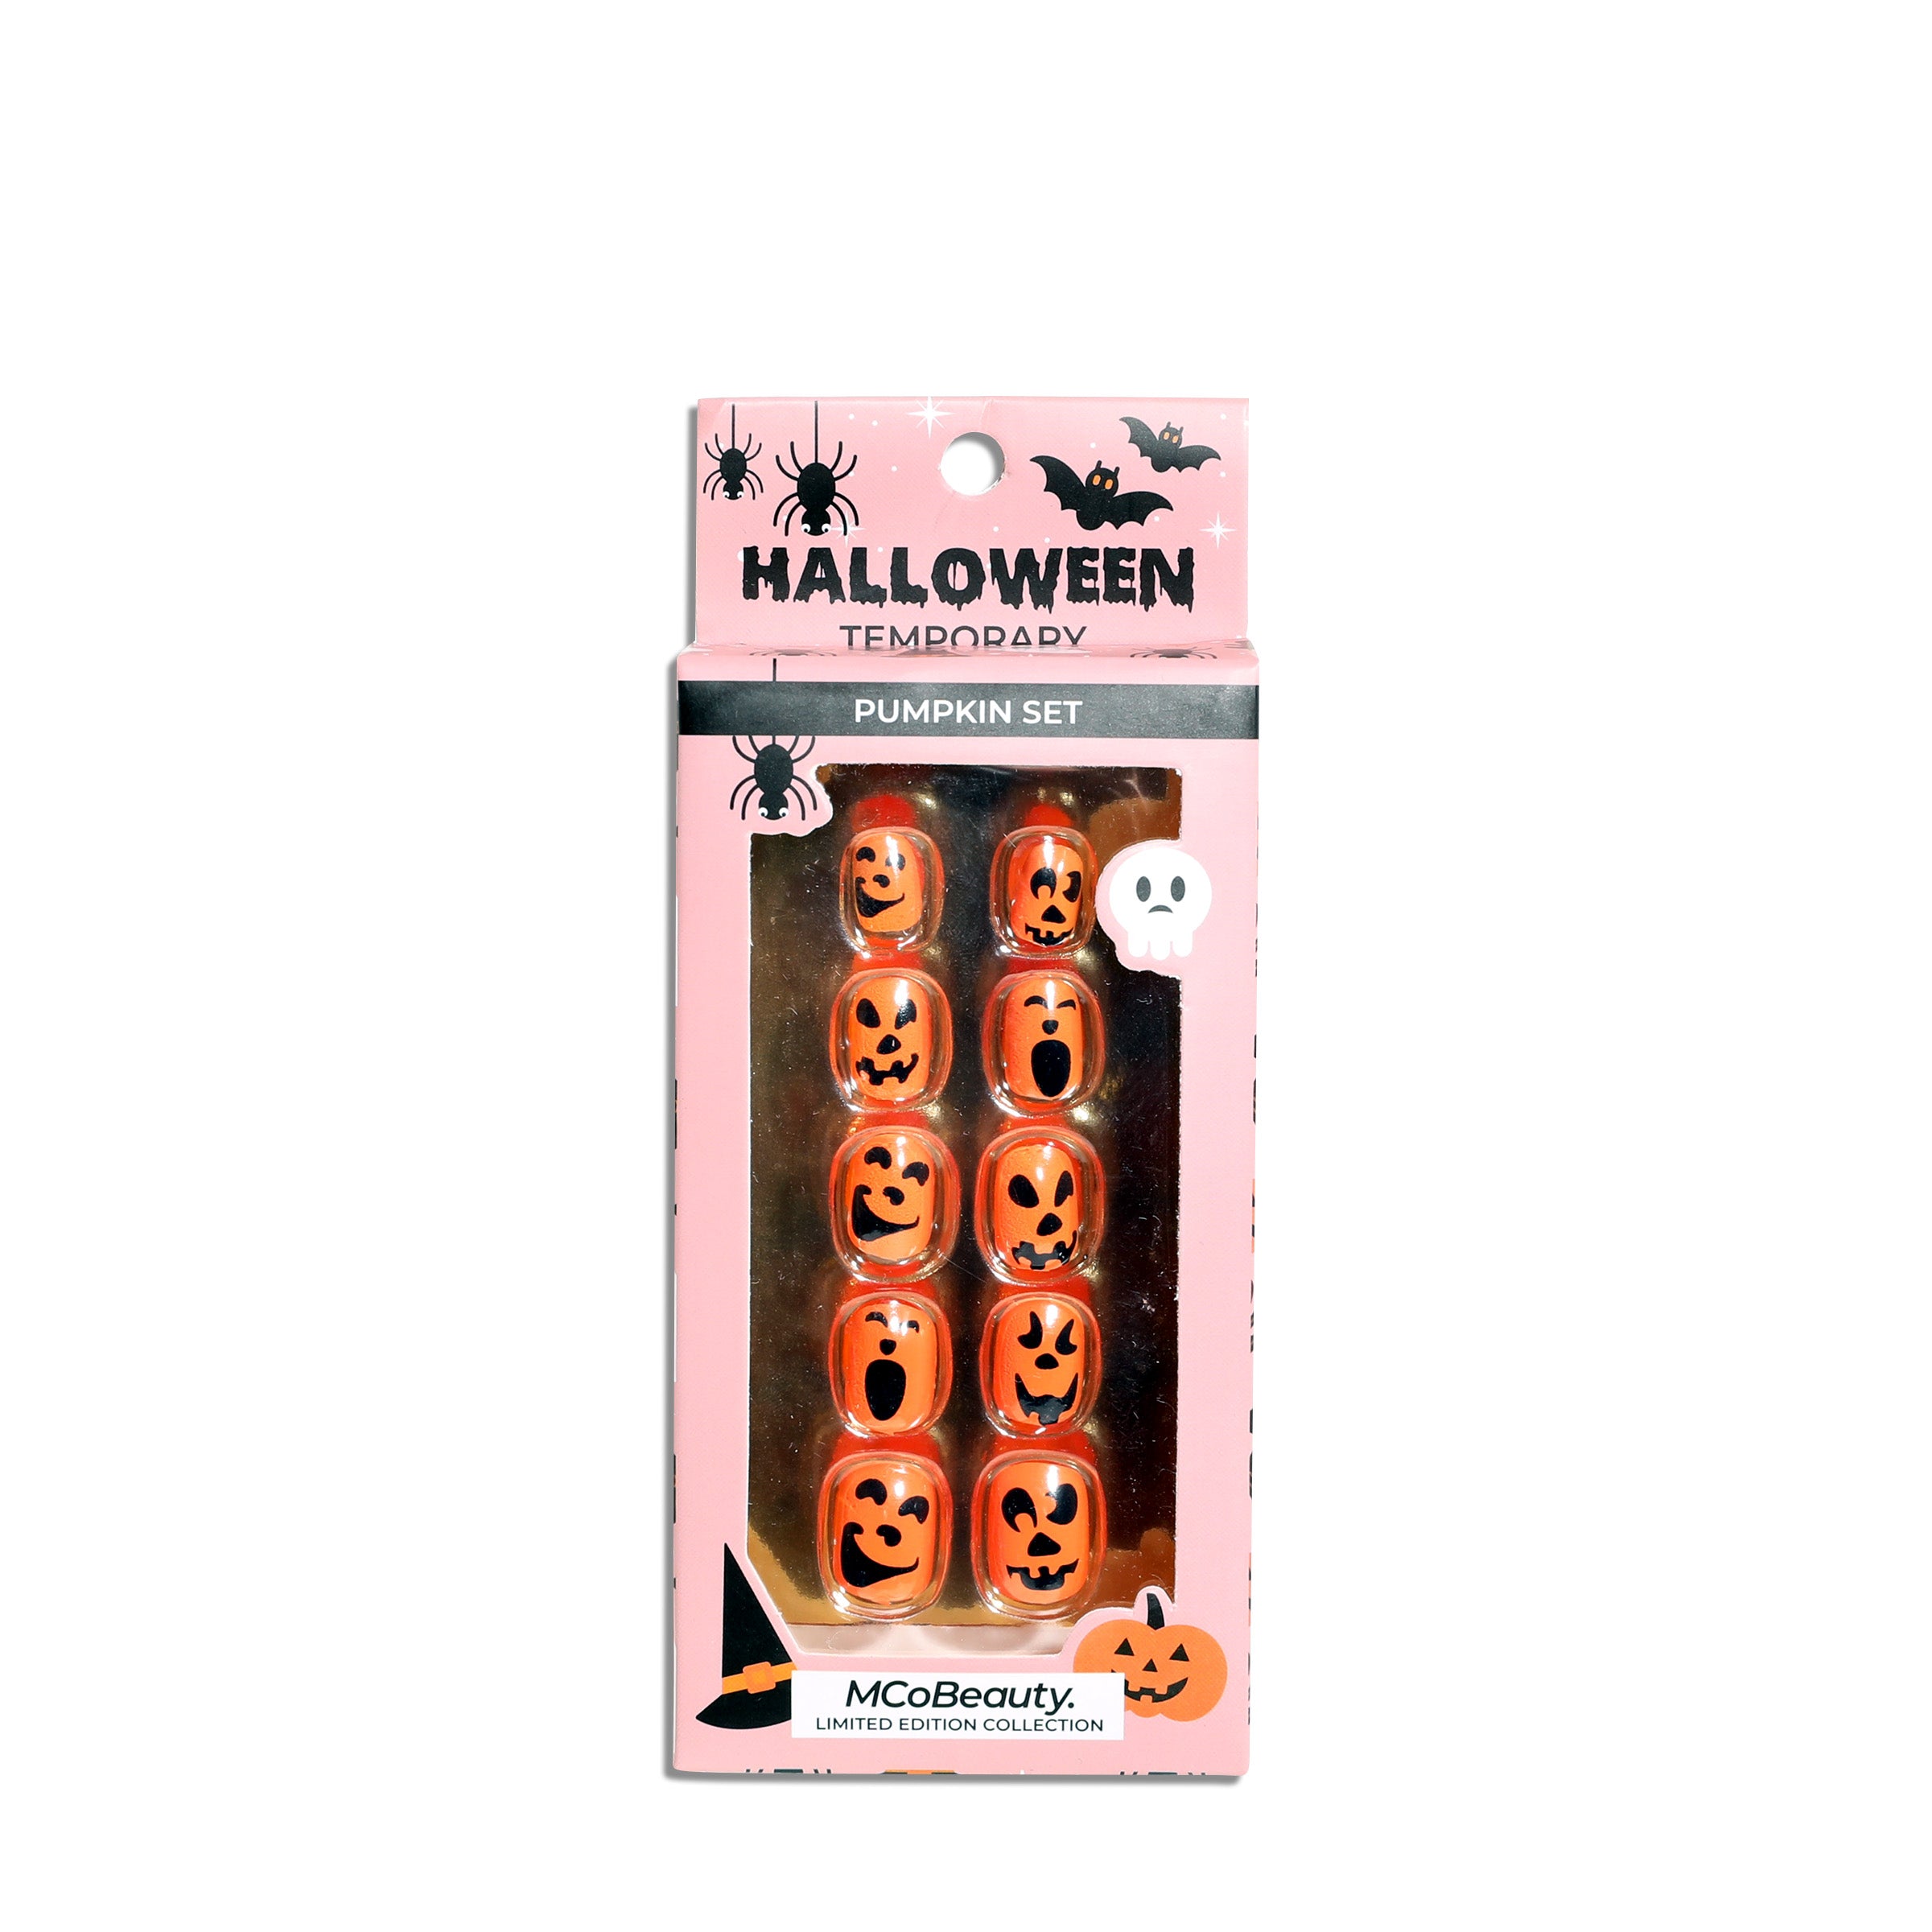 L HALLOWEEN e LTEMBRODRA DY IV MCoBeauty.* LIMITED EDITION COLLECTION 